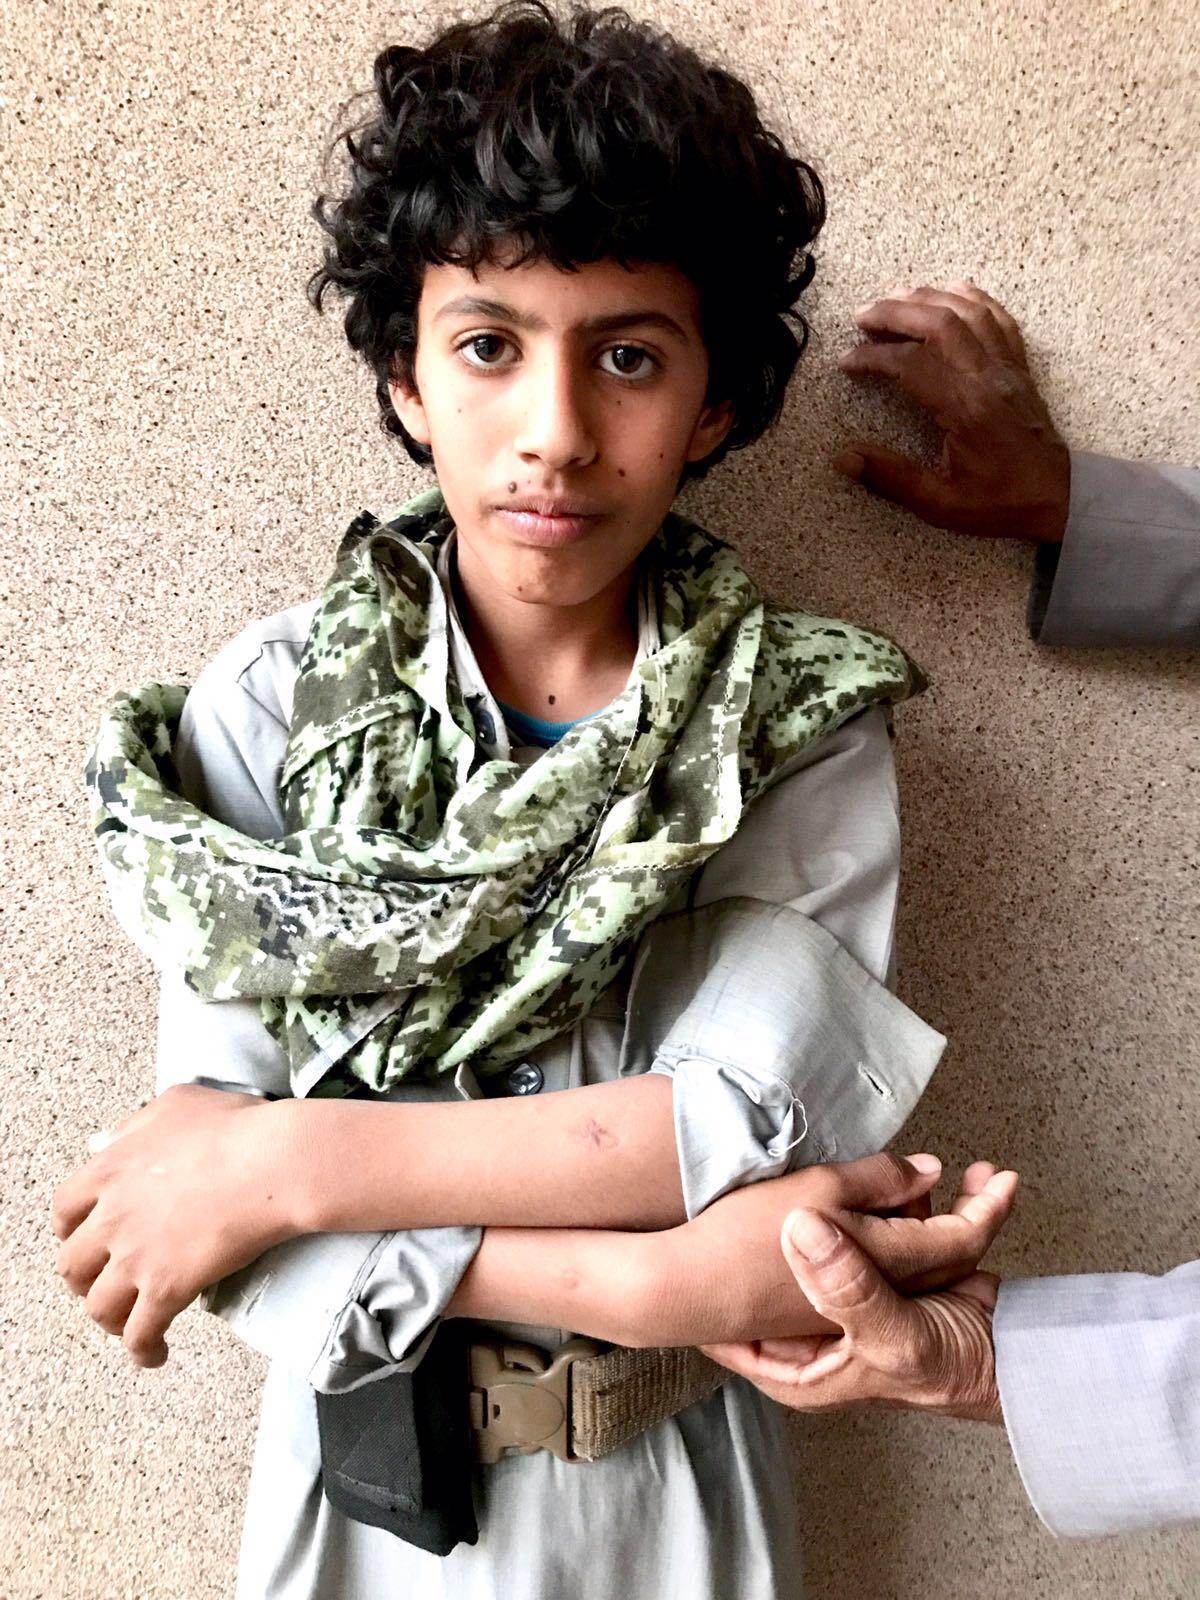 12-year-old Othman was injured and two of his older brothers killed in the 23 May US Navy Seal raid